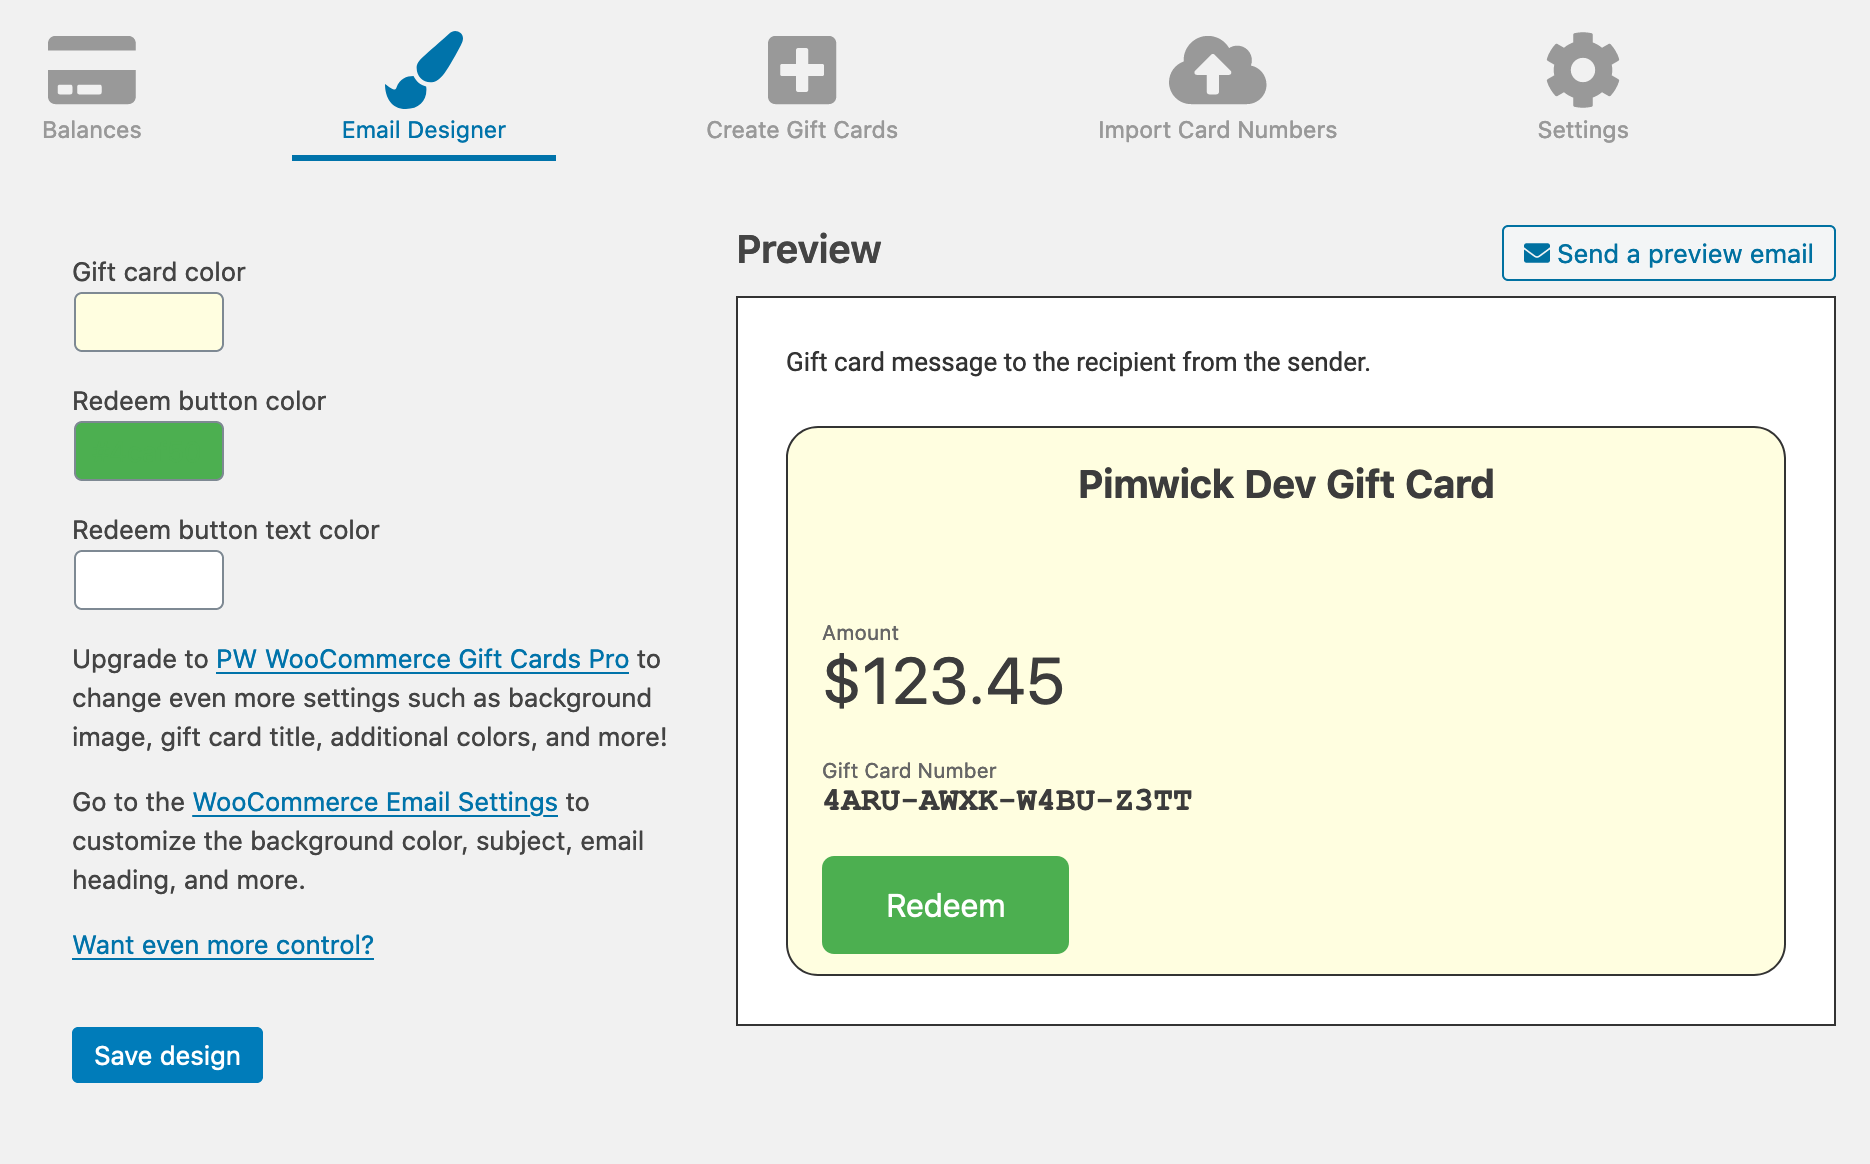 Use the email designer to customize your gift card.